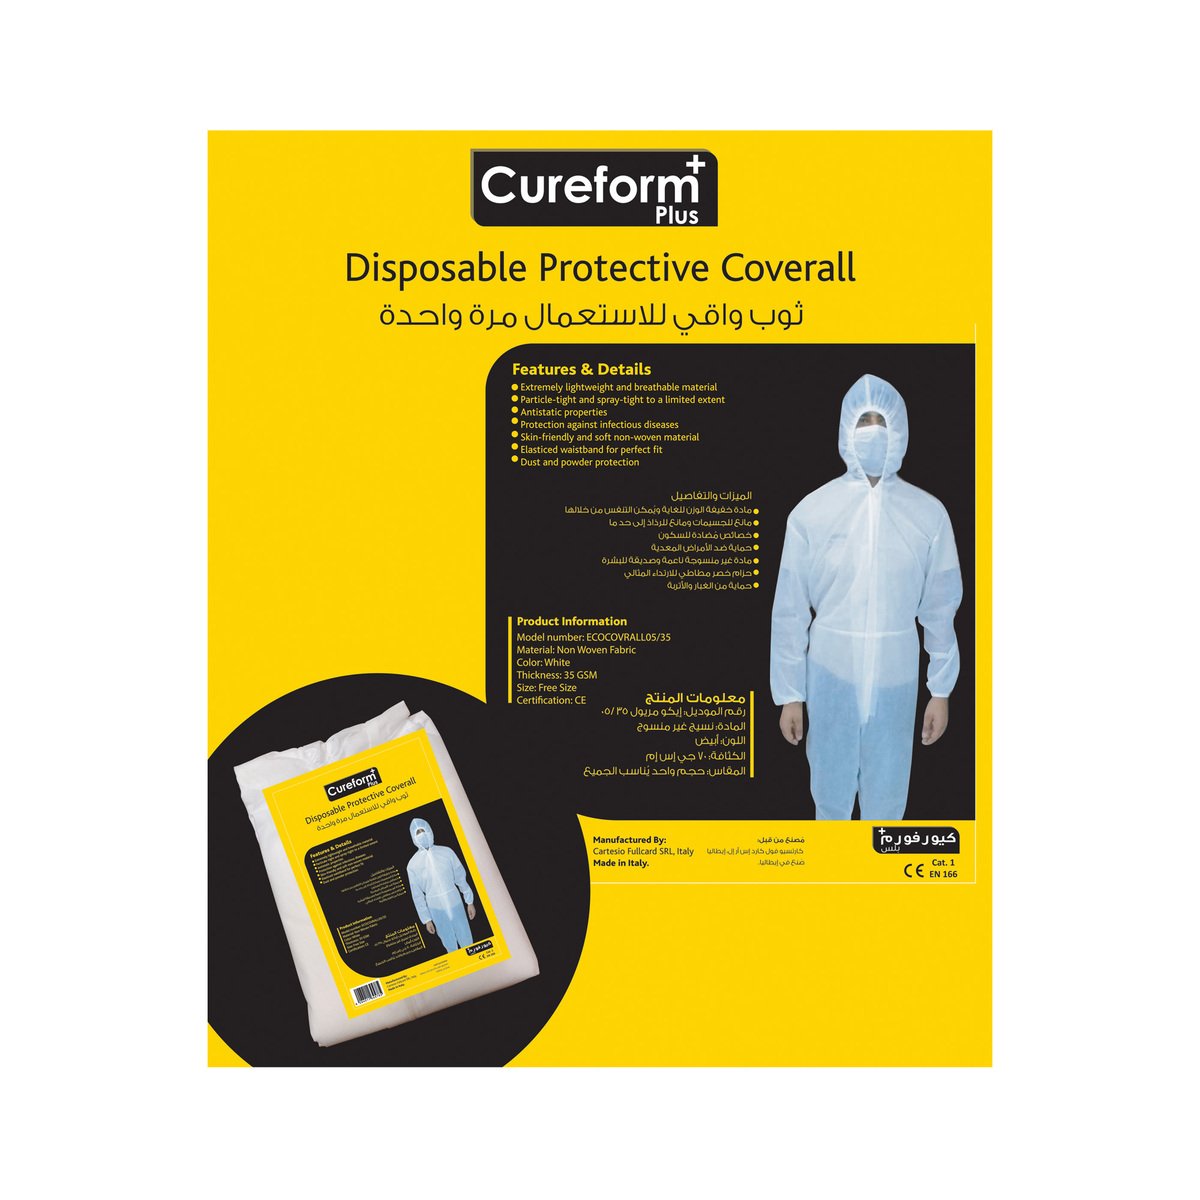 Cureform Plus Disposable Protective Coverall 1pc